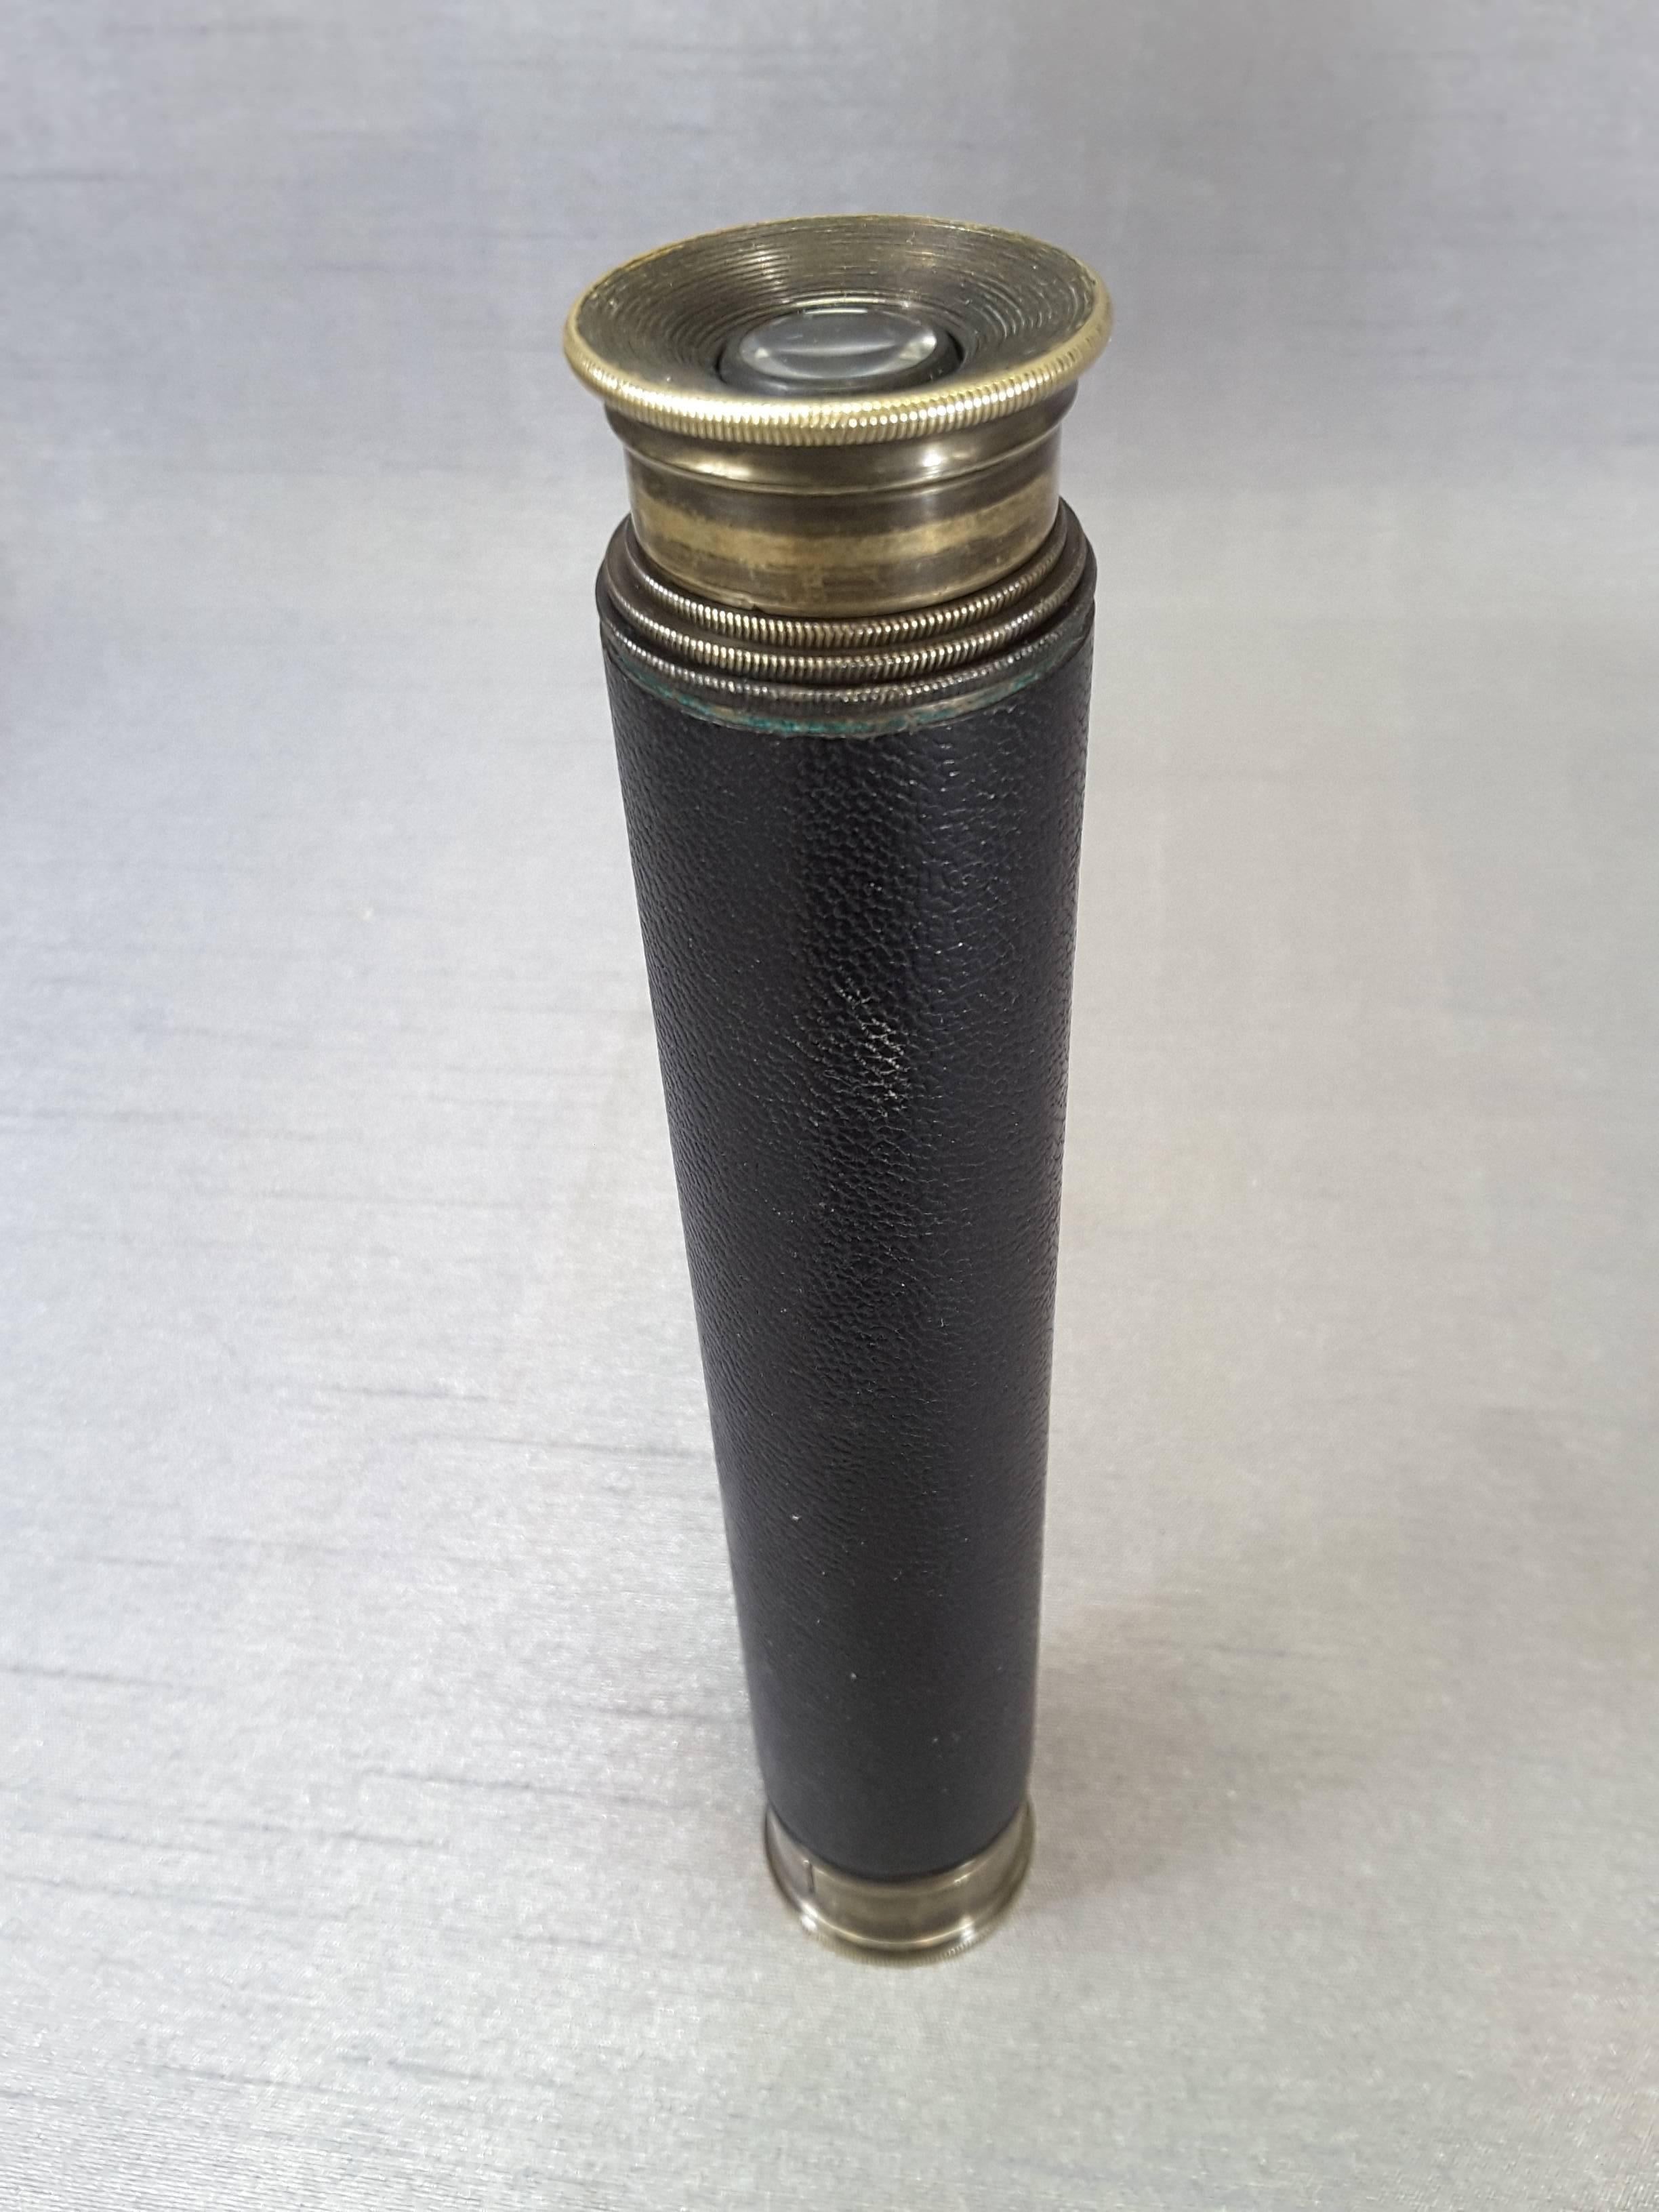 Newbold & Bulford 18X telescope “CUB”, Circa 1900.
A brass three draw brass telescope, the “Cub” 18 x by Enbeeco, London, England. Measures approximately 17 ¼” fully deployed, 6 ½” folded & 1 ½” diameter. Brass eyepiece cover. Leather binding.
    